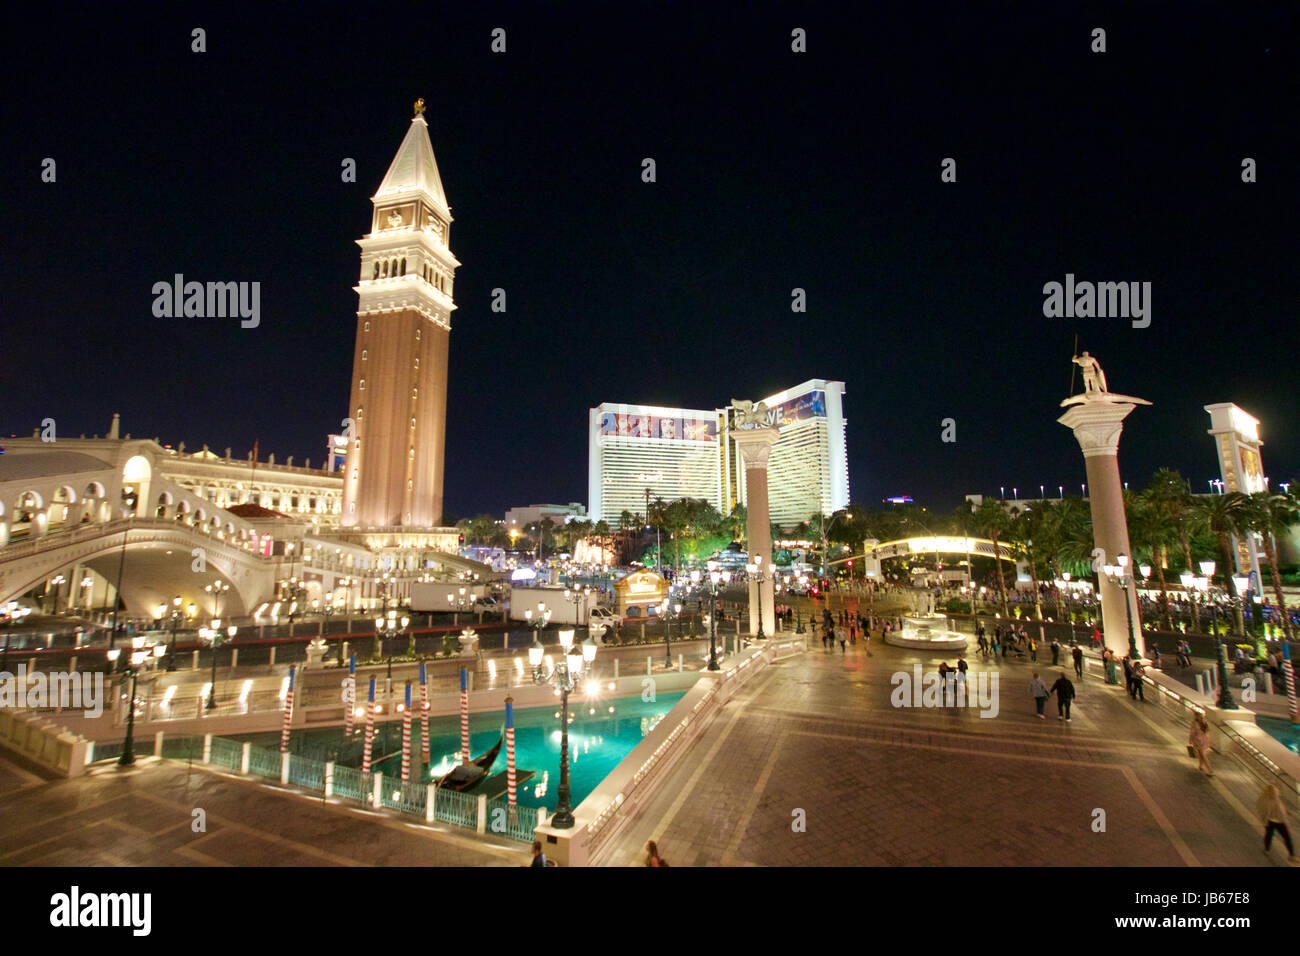 Venetian Hotel and Mirage Hotel in Las Vegas by night Stock Photo